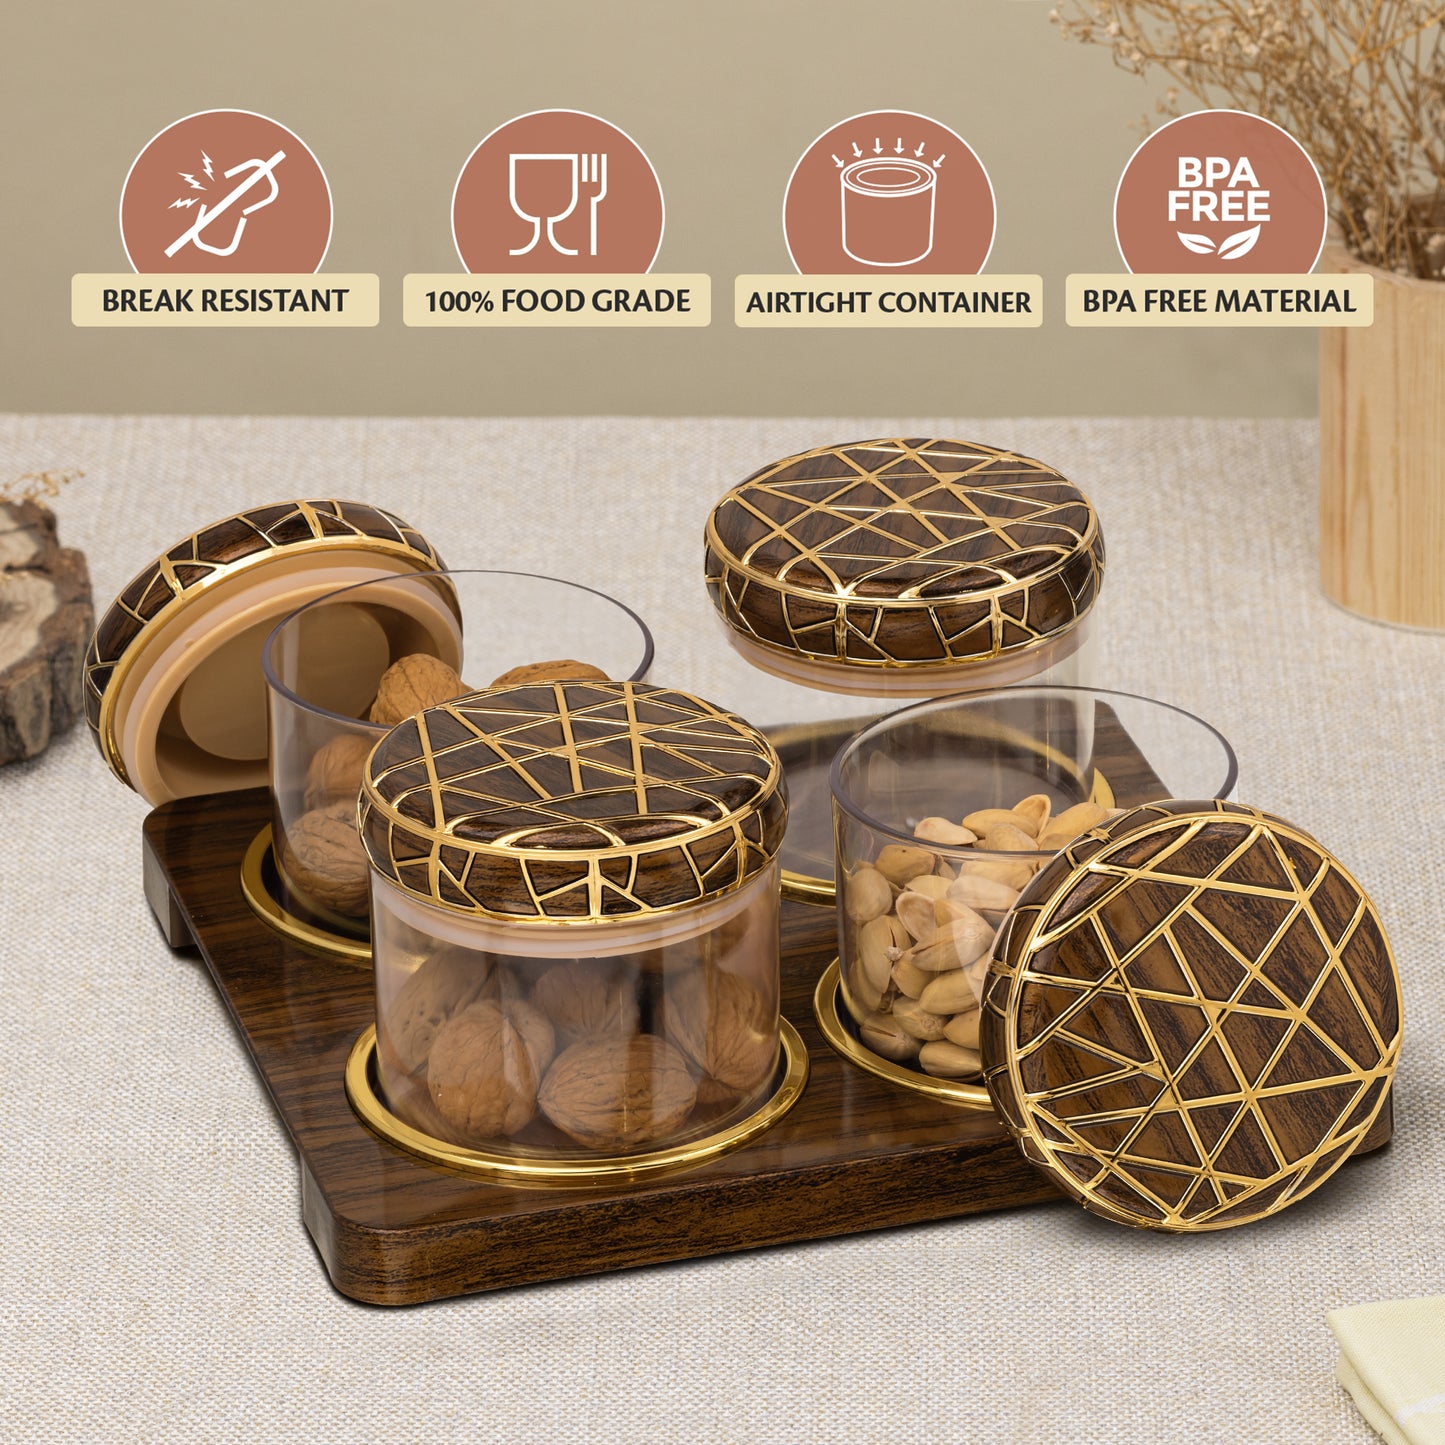 SELVEL Rosewood Airtight Dry Fruit Container Tray Set - 4 Pieces (450ml), Dark Wood Polypropylene with Luxurious Gold Foil Embellishments